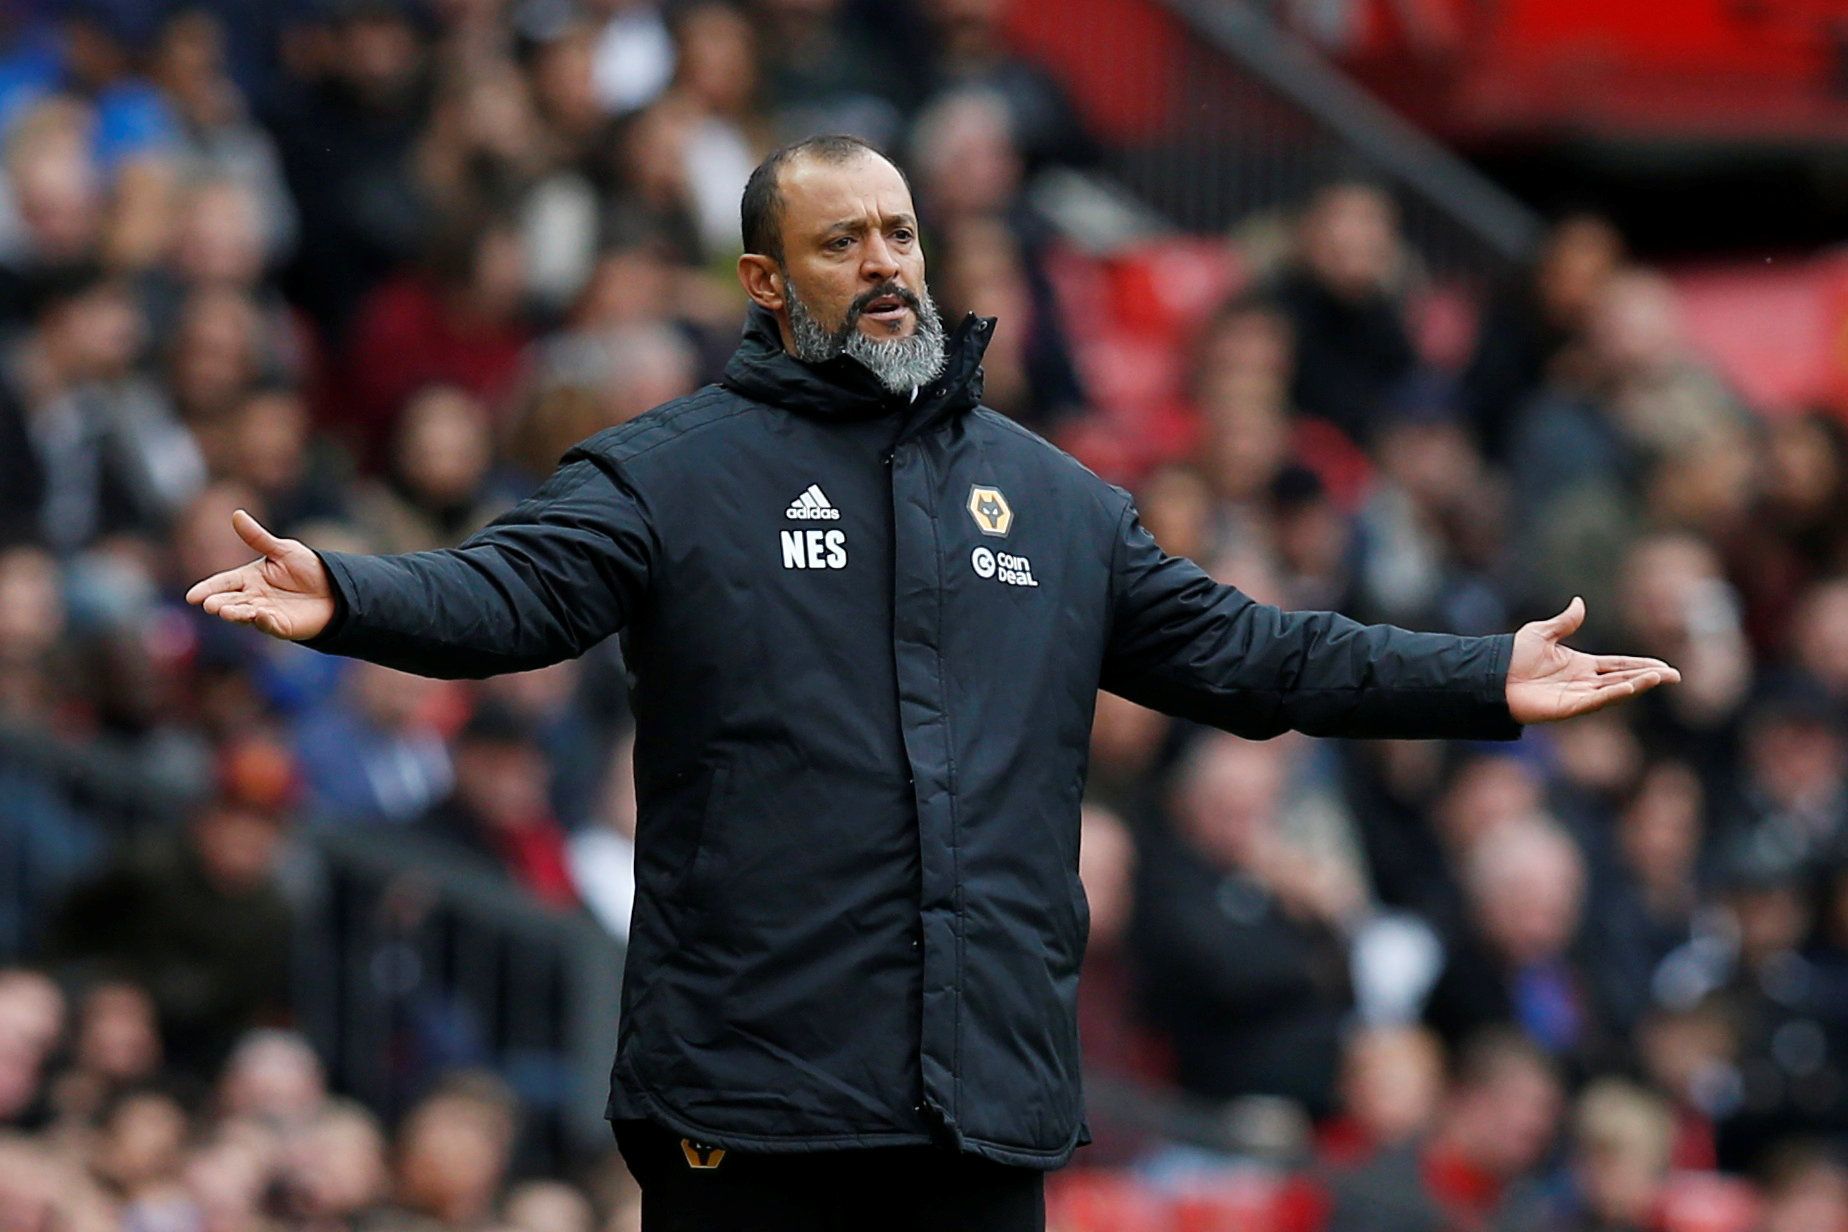 Soccer Football - Premier League - Manchester United v Wolverhampton Wanderers - Old Trafford, Manchester, Britain - September 22, 2018  Wolverhampton Wanderers manager Nuno Espirito Santo reacts             REUTERS/Andrew Yates  EDITORIAL USE ONLY. No use with unauthorized audio, video, data, fixture lists, club/league logos or 